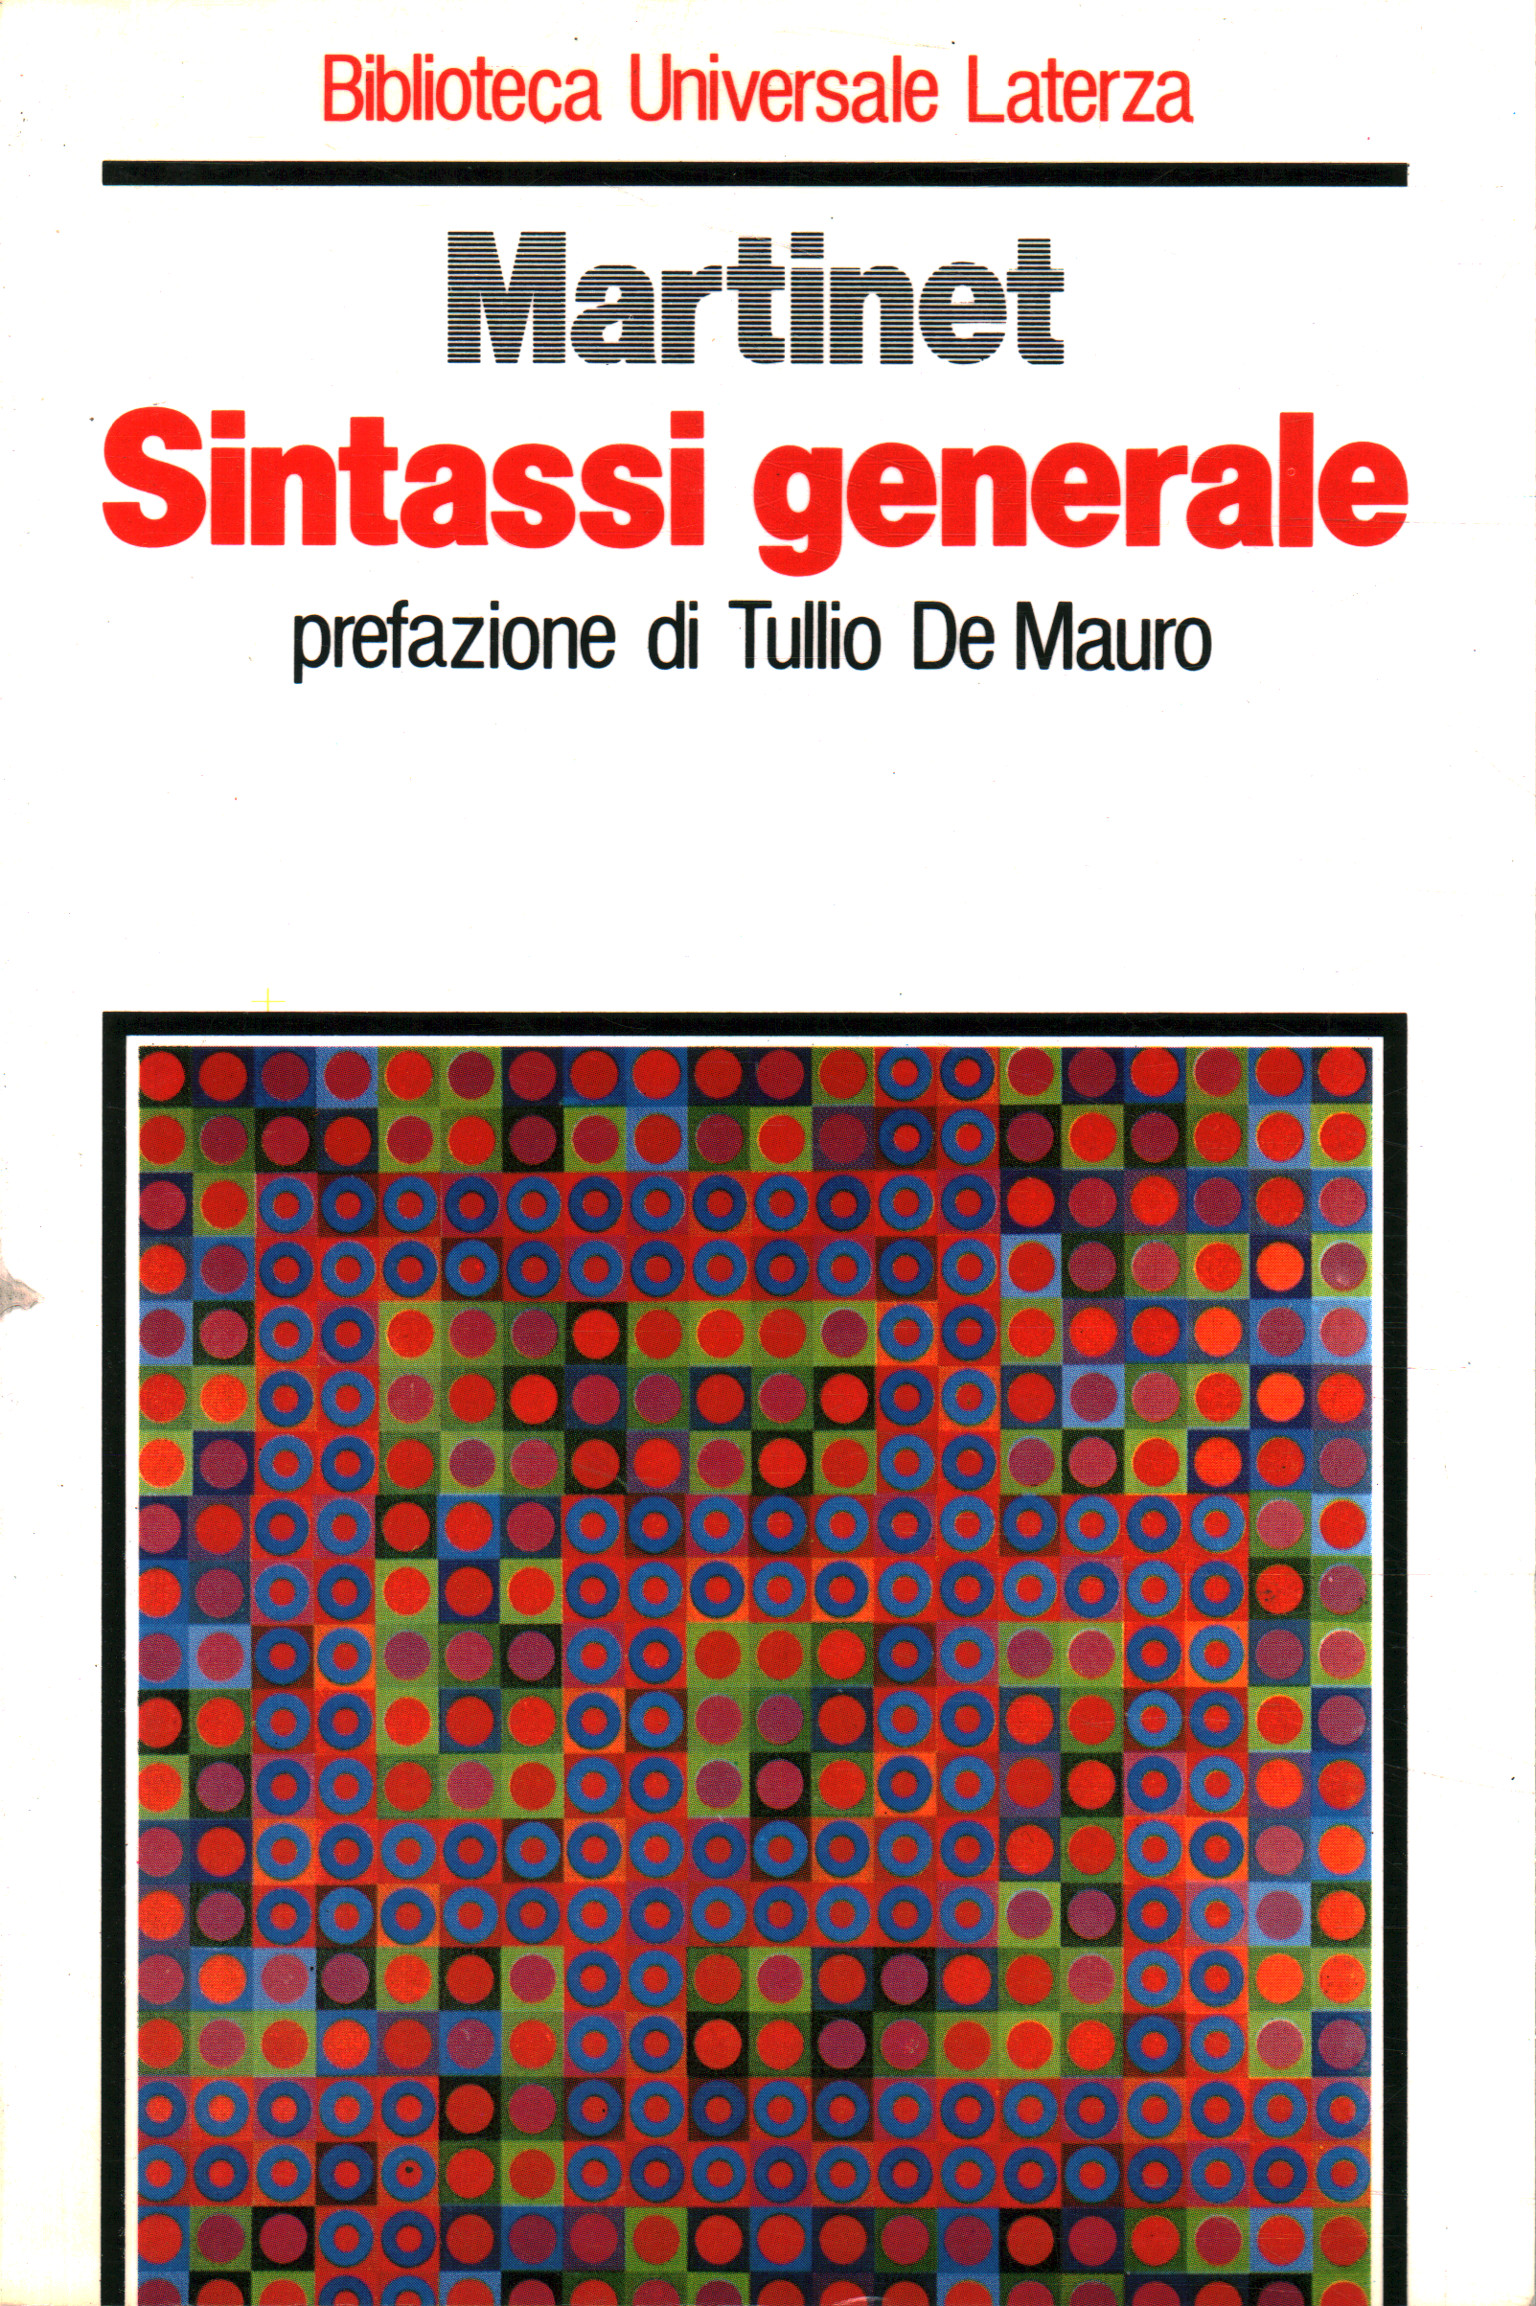 Sintaxis general